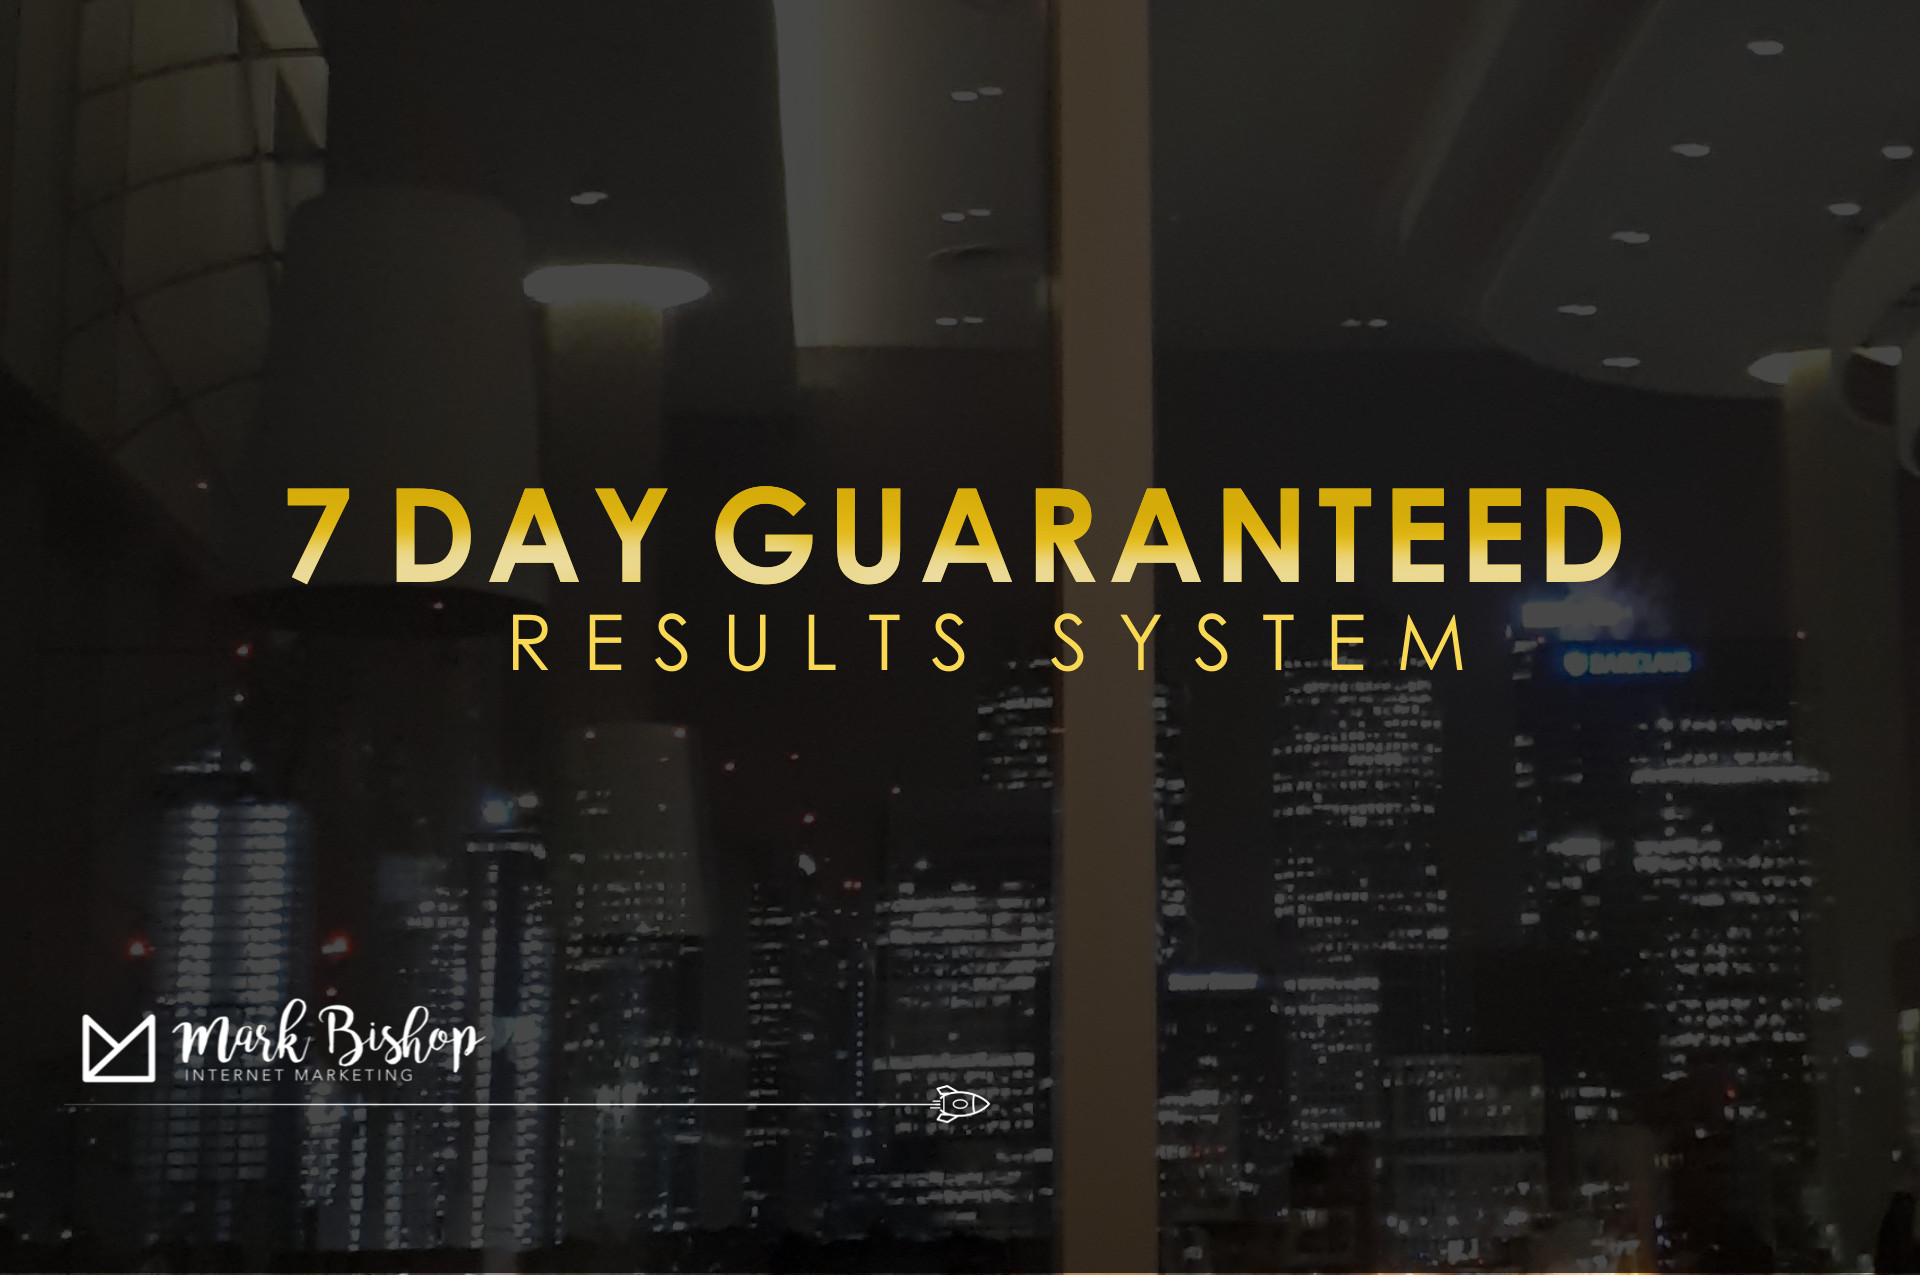 [GET] 7LRP2 – 7 Day Guaranteed Results System Download